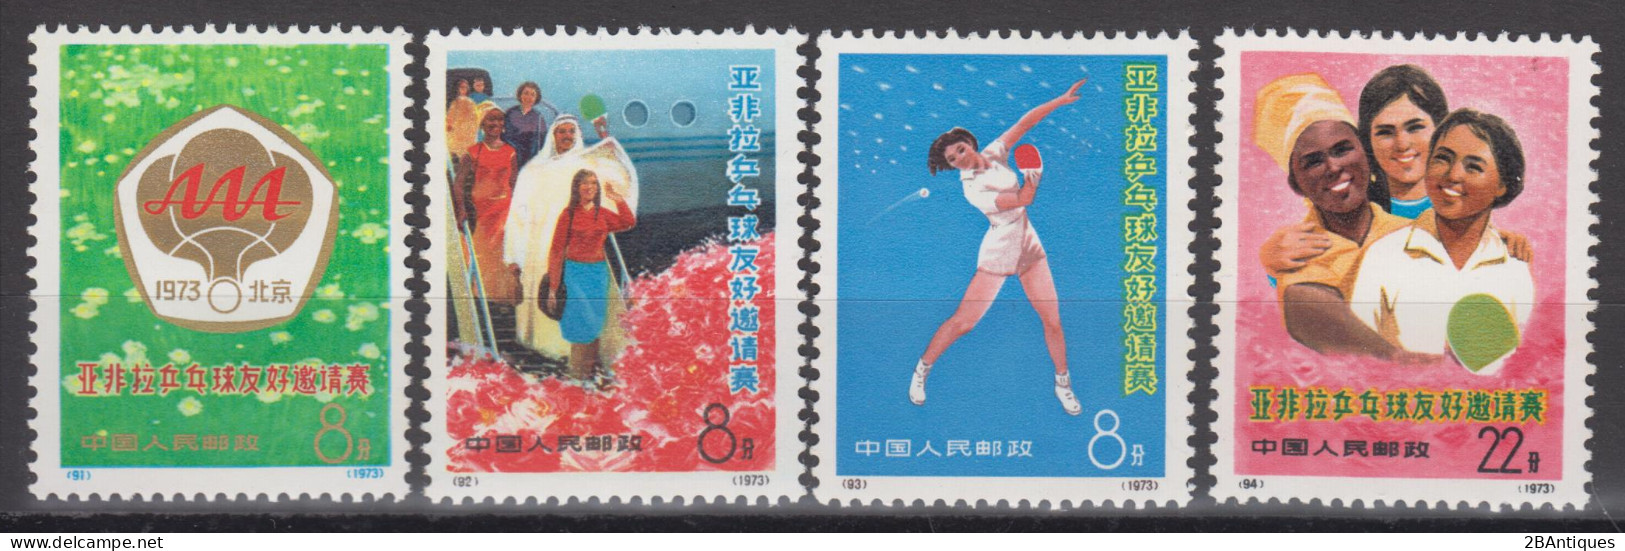 PR CHINA 1973 - Asian, African And Latin-American Table Tennis Championships MNH** OG XF - Unused Stamps